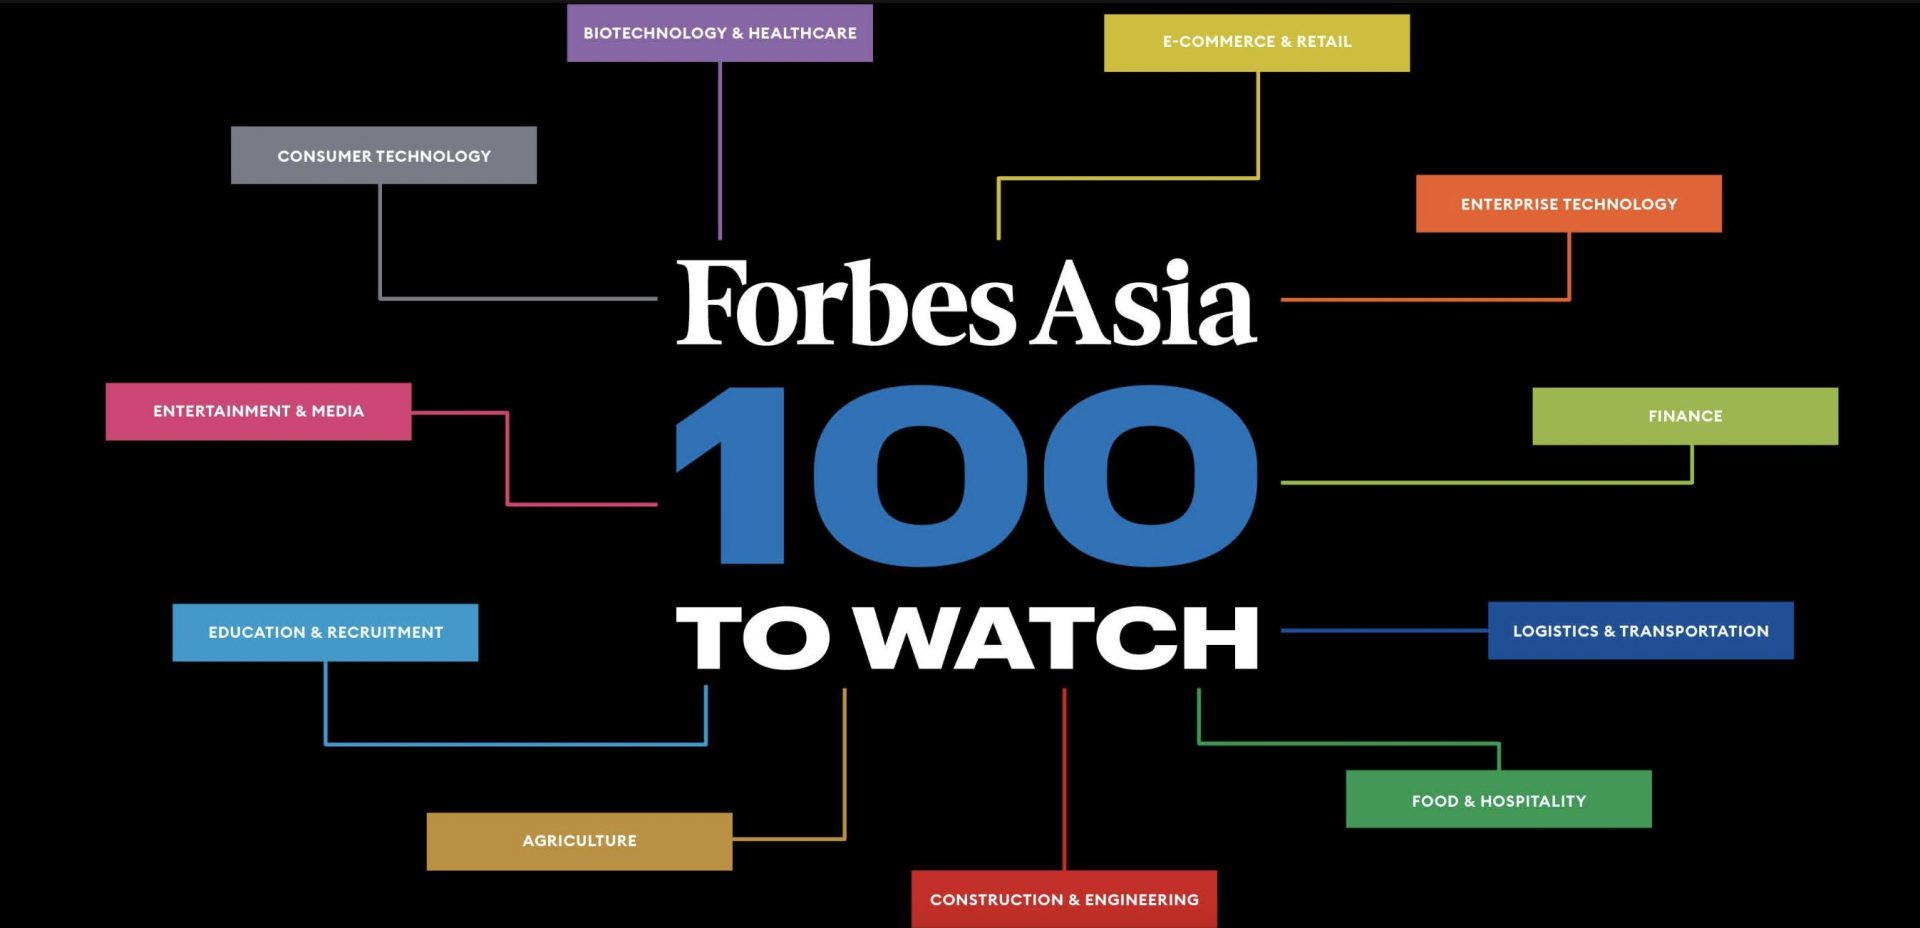 Daily Markup #581: Homage, Merkle Science, Una Brands, PeopleFund, Spaceship, and Workmate on Forbes Asia 100 to Watch